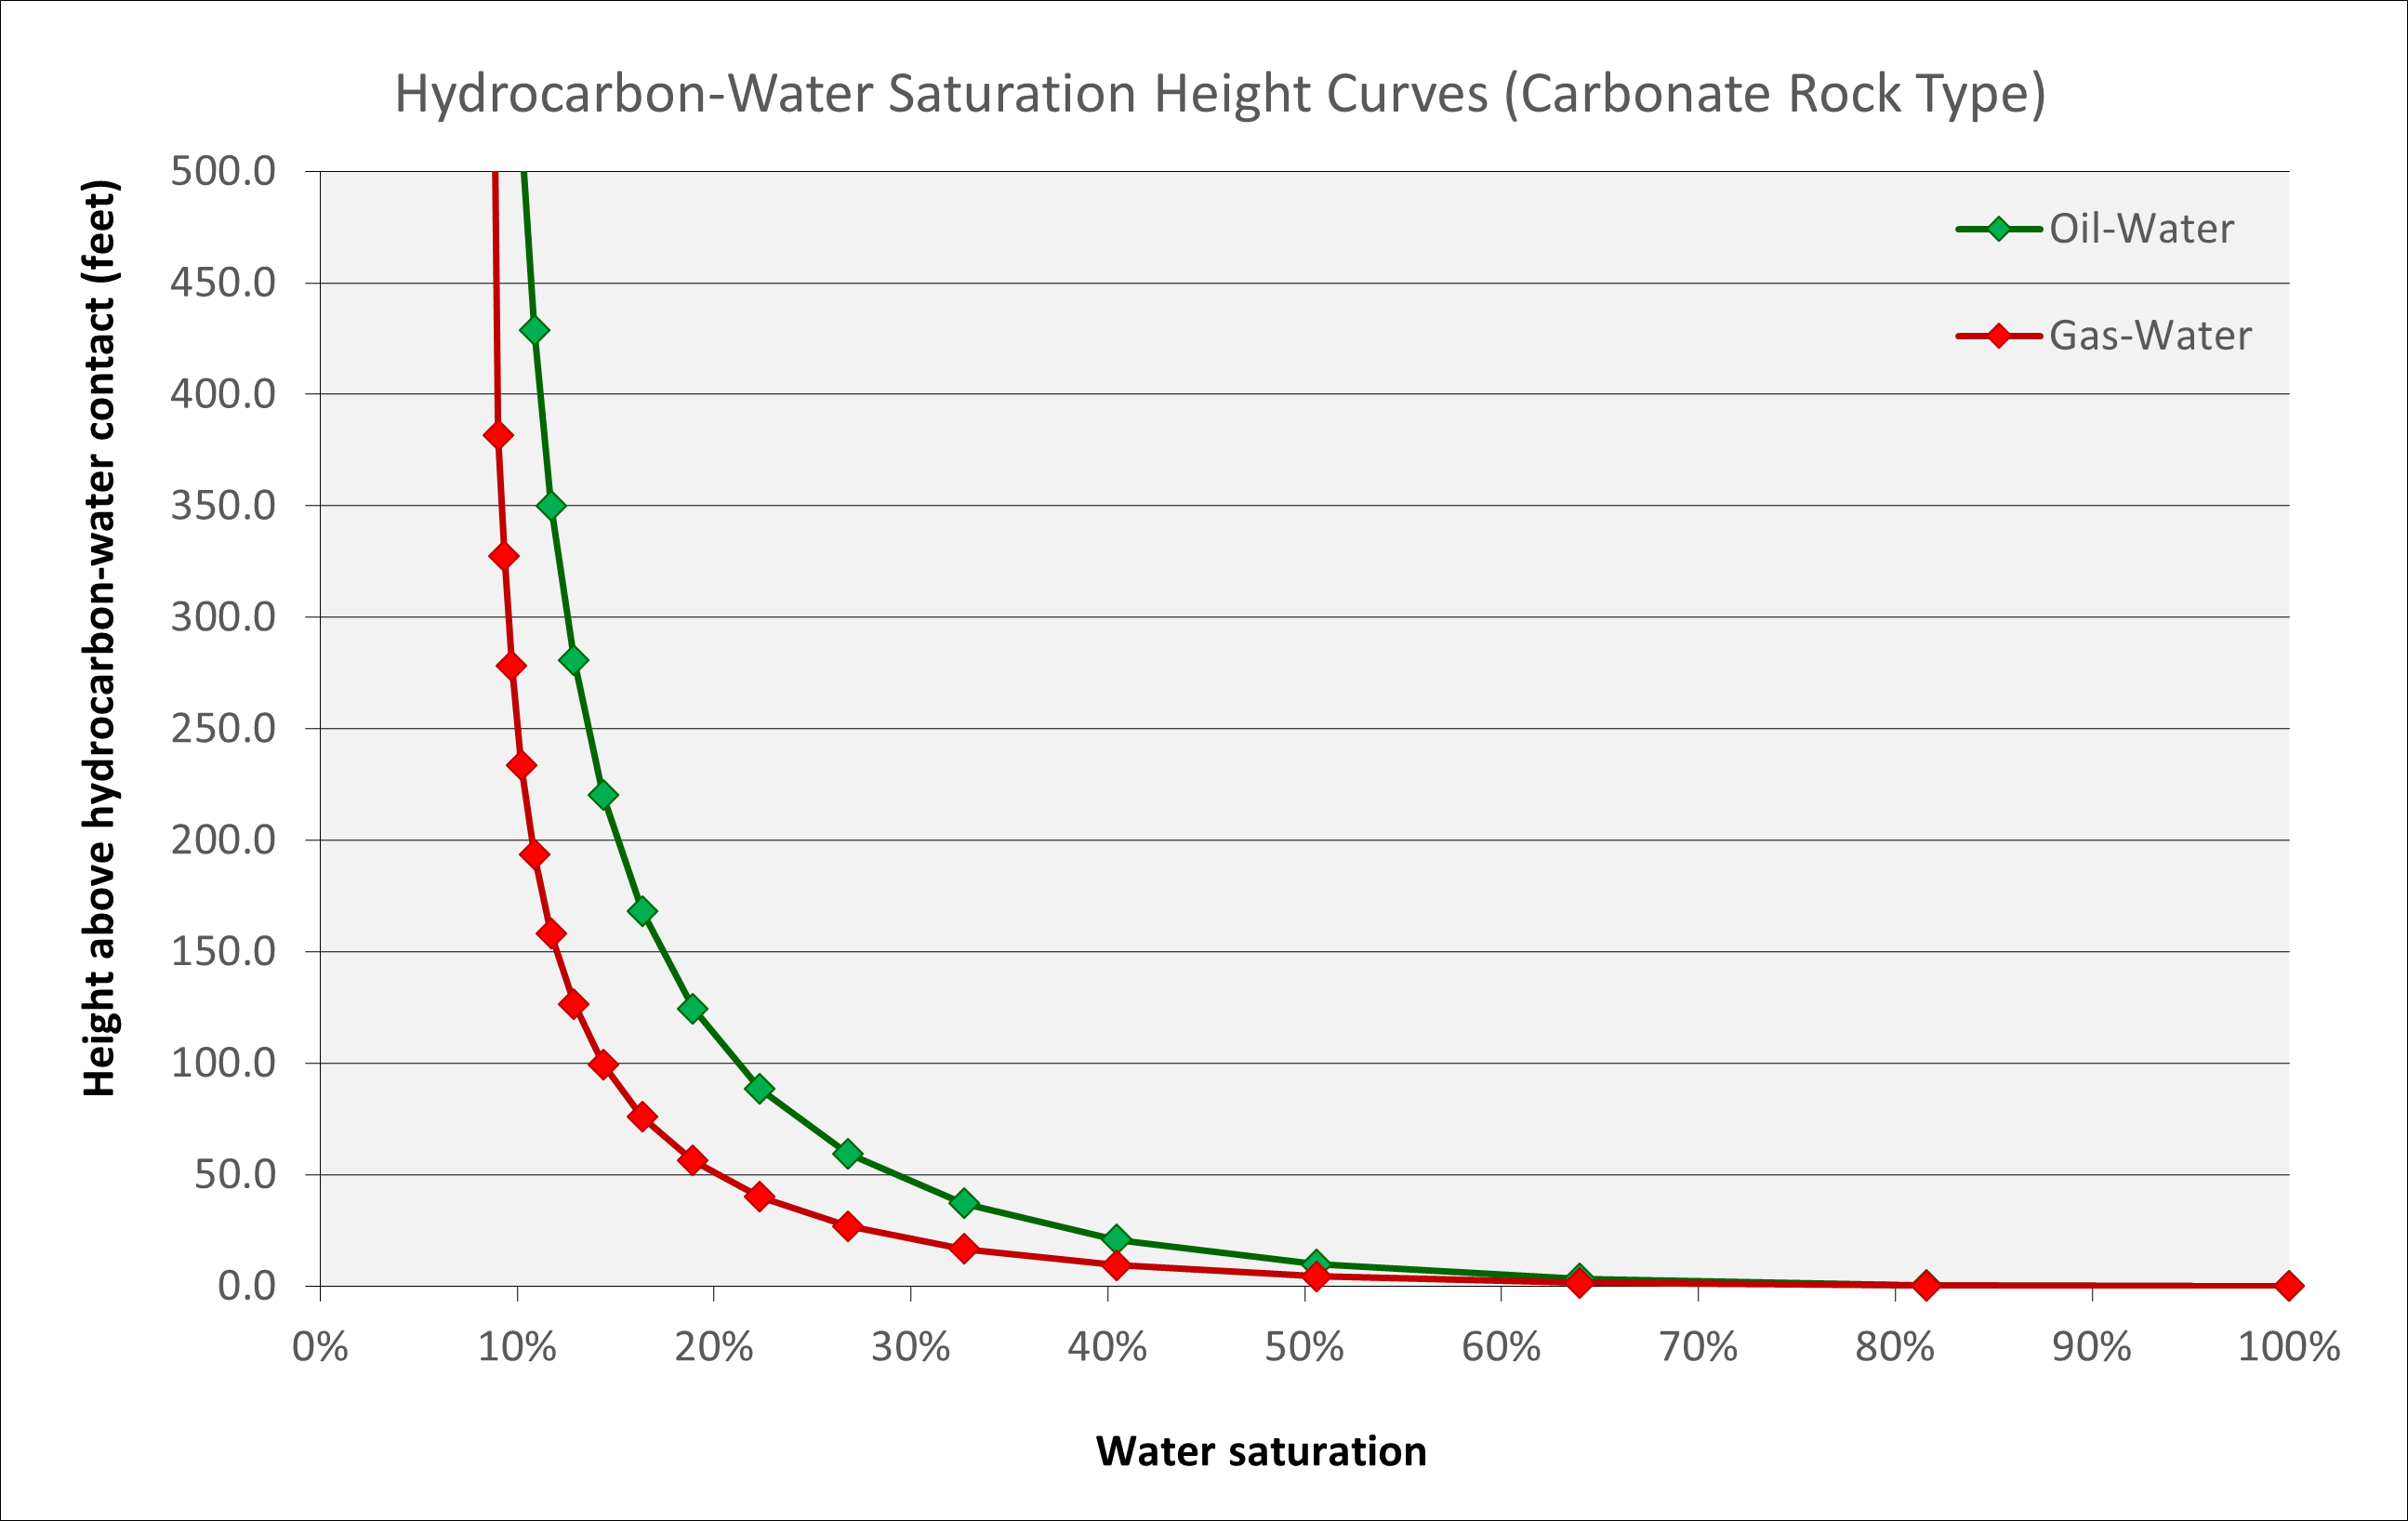 Saturation height function showing decrease in water saturation versus height for oil-water and gas-water systems.